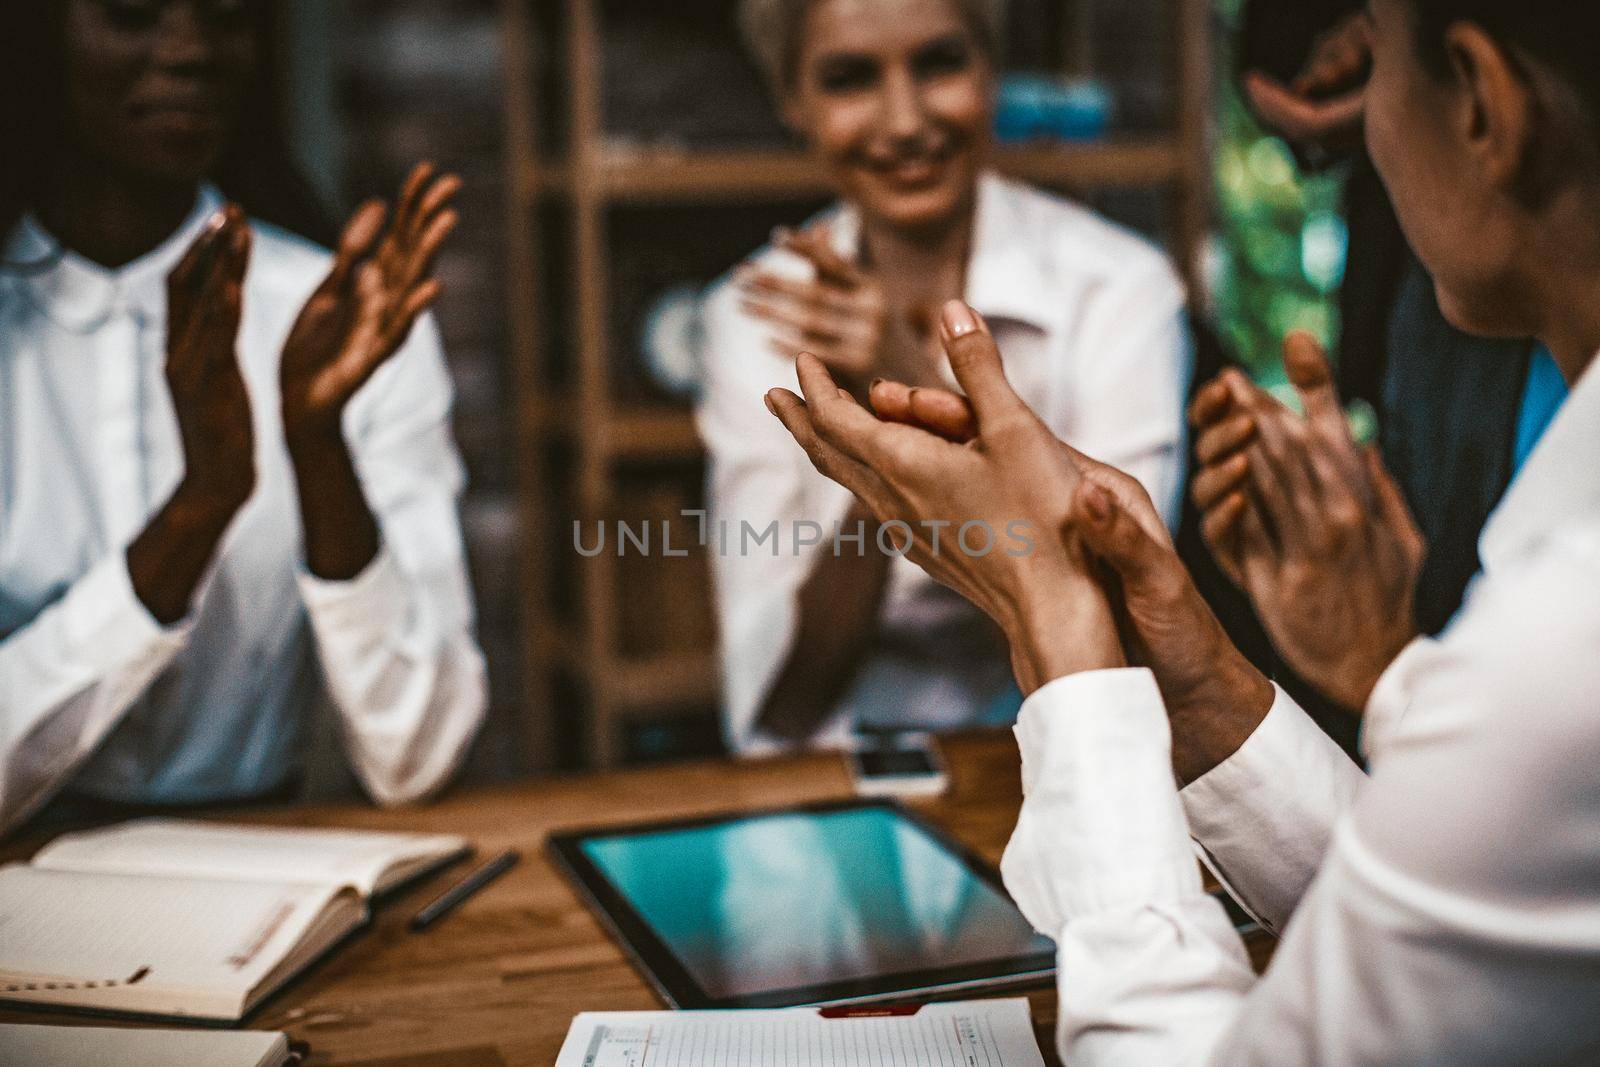 Applause After Successful Brainstorming, Сharming Multi-Ethnic Team Of Women Colleague In White Clothes Applauds At Business Meeting, Focus On Caucasian Woman Clapping Hands In Foreground, Toned Image